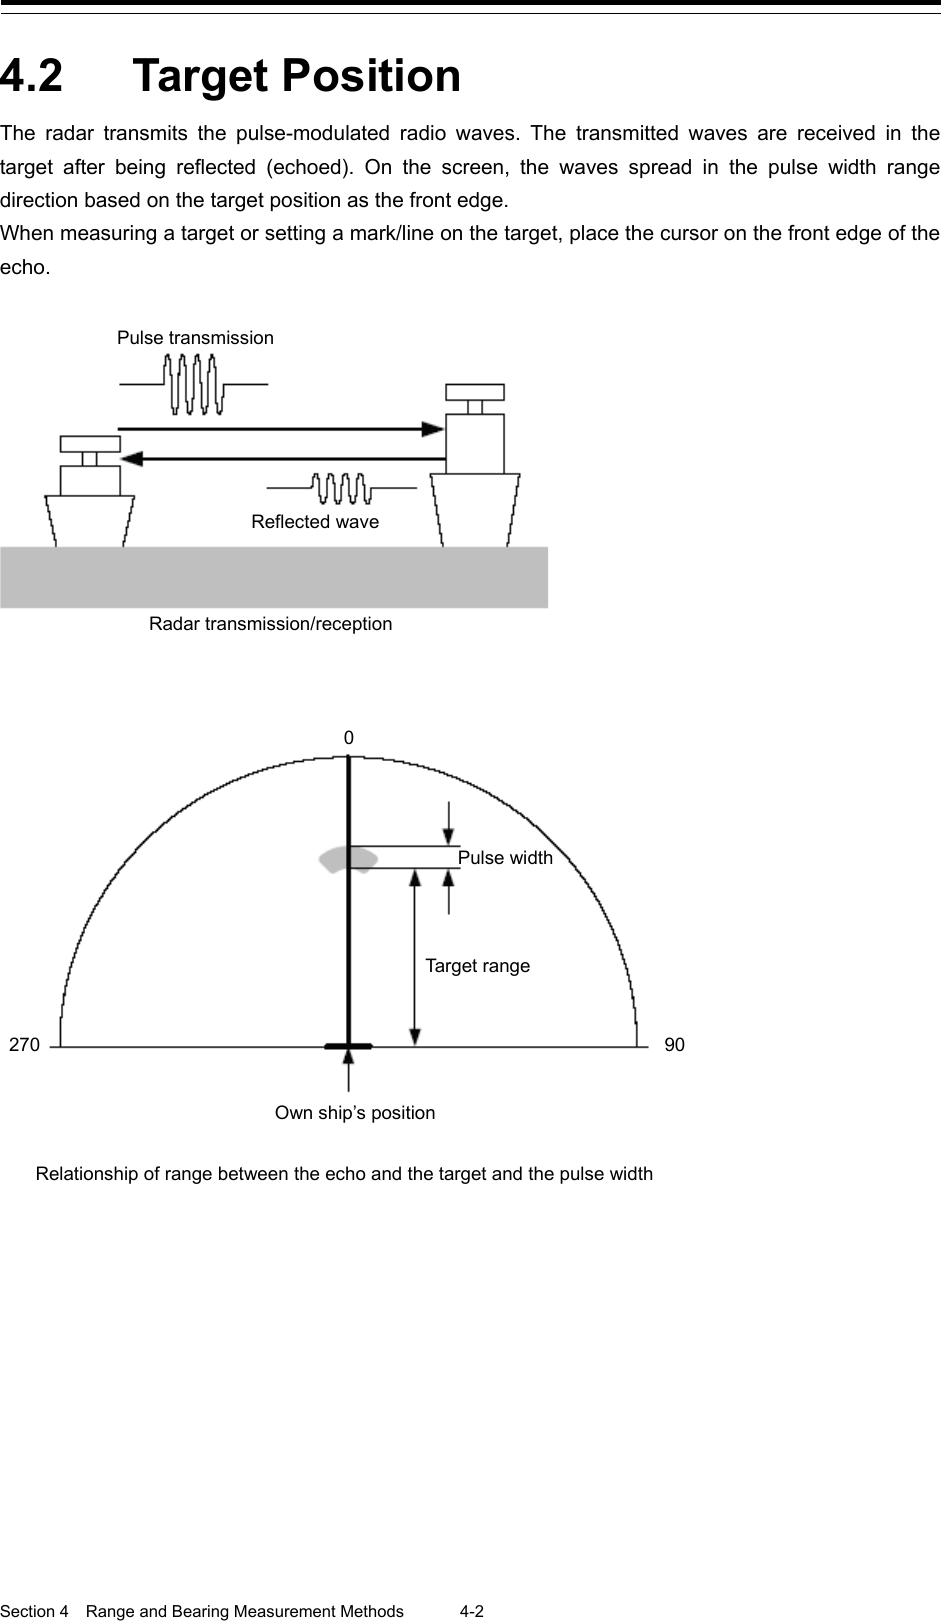  Section 4  Range and Bearing Measurement Methods 4-2  4.2  Target Position The radar transmits the pulse-modulated radio waves. The transmitted waves are received in the target after being reflected (echoed). On the screen, the waves spread in the pulse width range direction based on the target position as the front edge.   When measuring a target or setting a mark/line on the target, place the cursor on the front edge of the echo.    Radar transmission/reception       Relationship of range between the echo and the target and the pulse width     Pulse transmission Reflected wave 270 90 0 Pulse width Target range Own ship’s position 